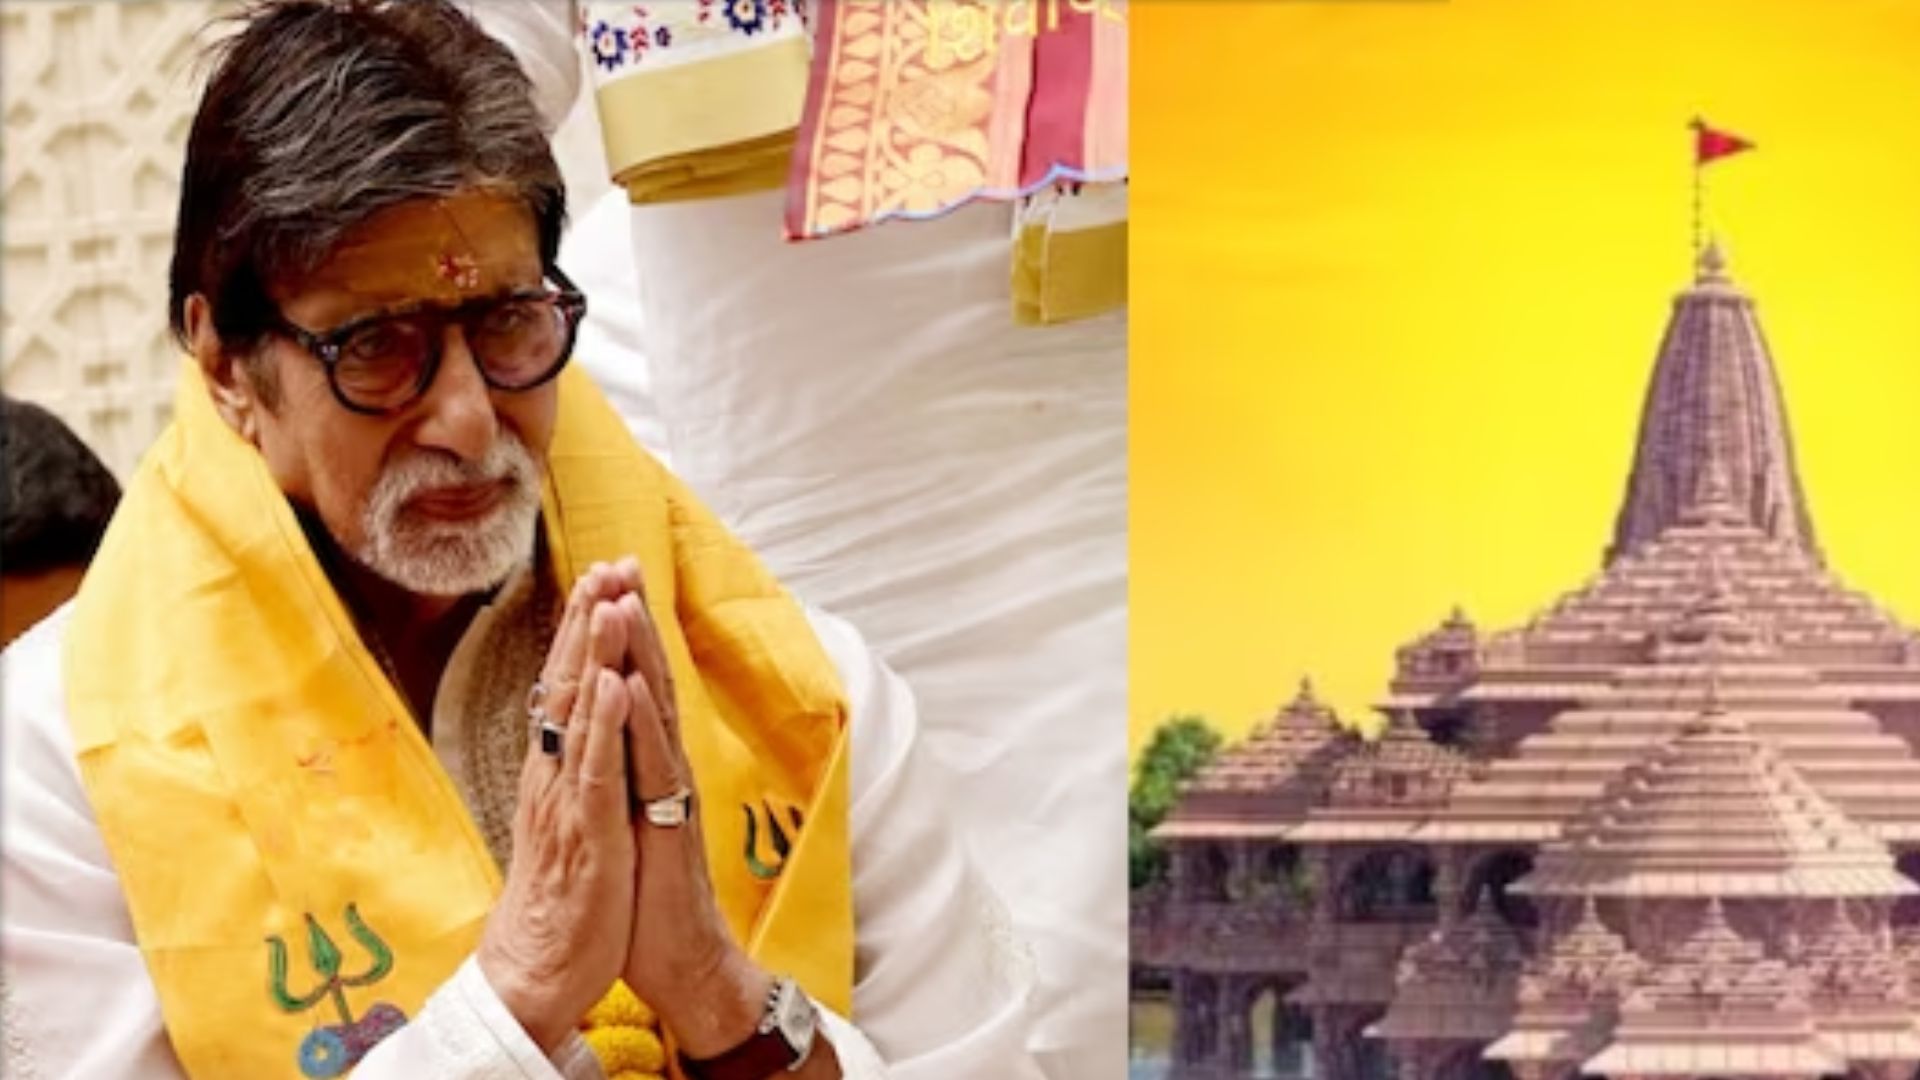 Amitabh Bachchan purchaes a plot for Rs 14.5 crore in Ayodhya days ahead of Ram Janmabhoomi Temple inauguration